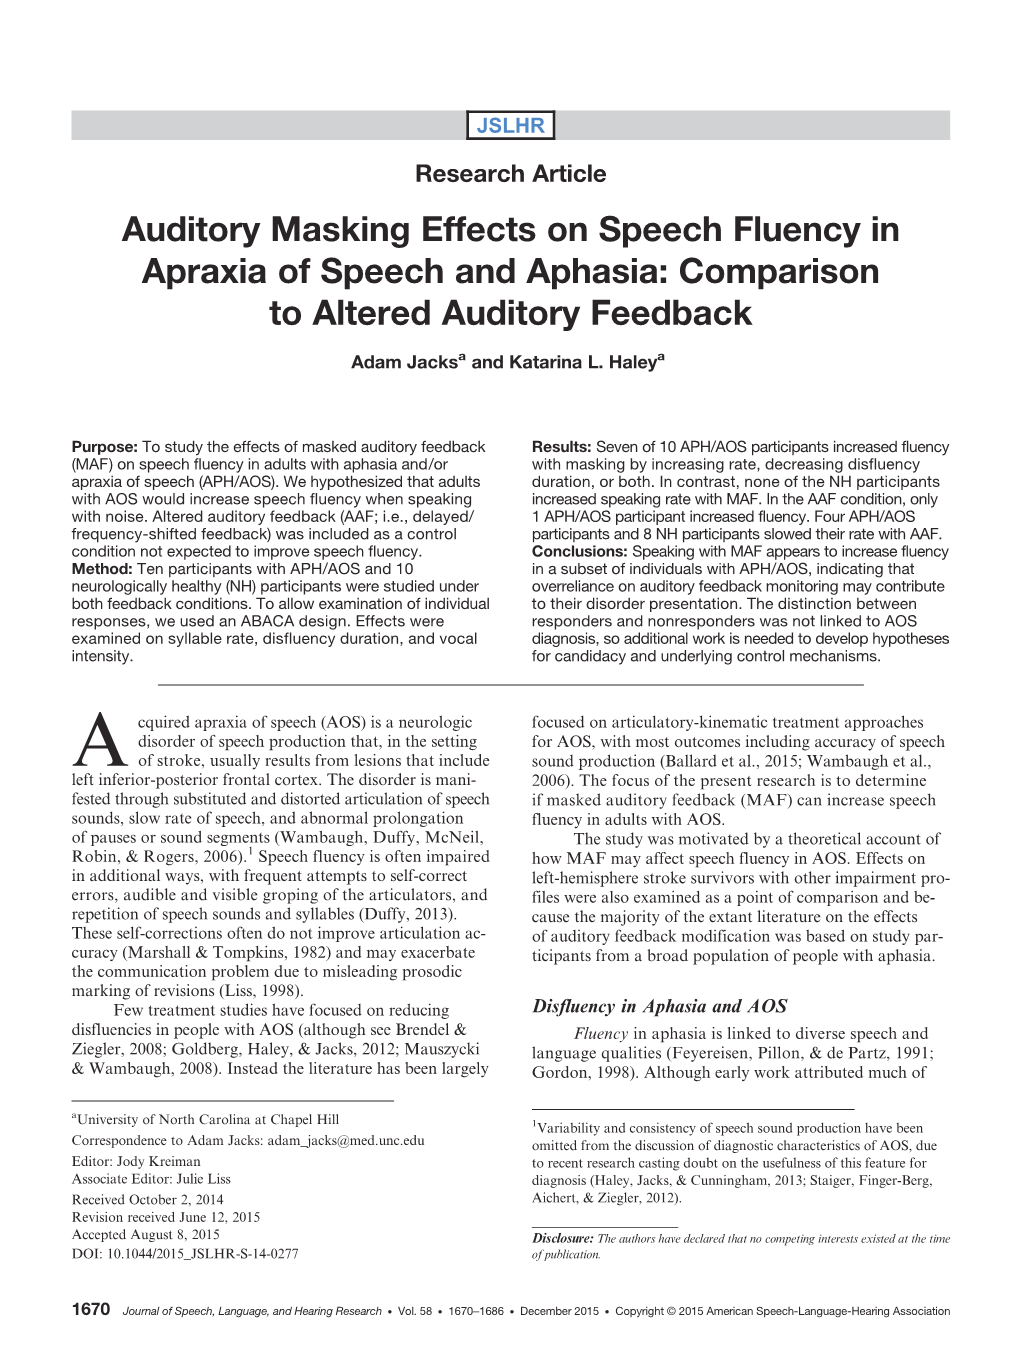 Auditory Masking Effects on Speech Fluency in Apraxia of Speech and Aphasia: Comparison to Altered Auditory Feedback